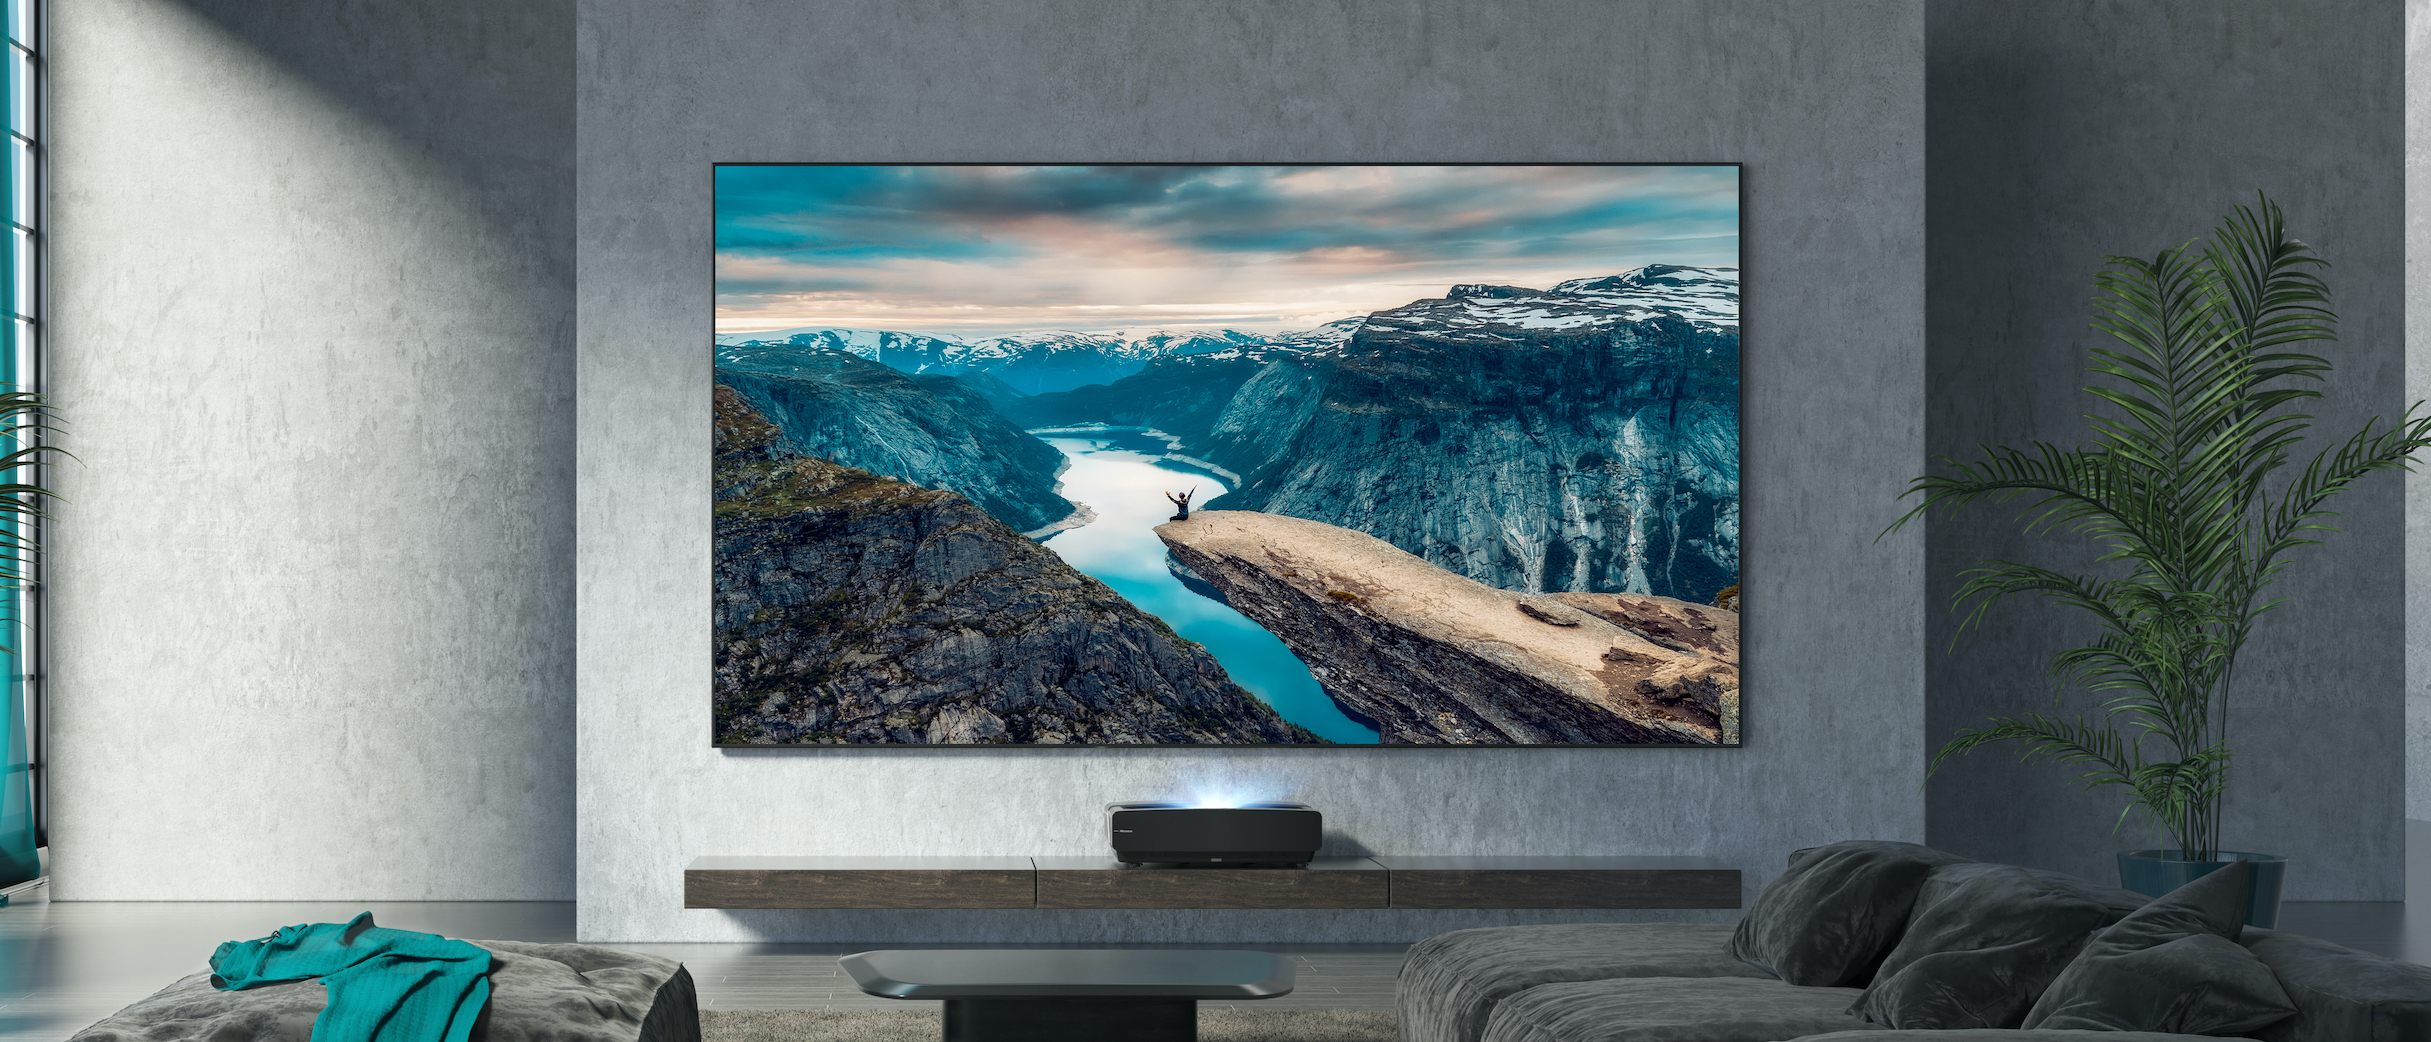 Huge 100-inch 4K Laser TV: 100 Inches for Less $$$, If you want to scale  your screen, you might want to consider a laser TV